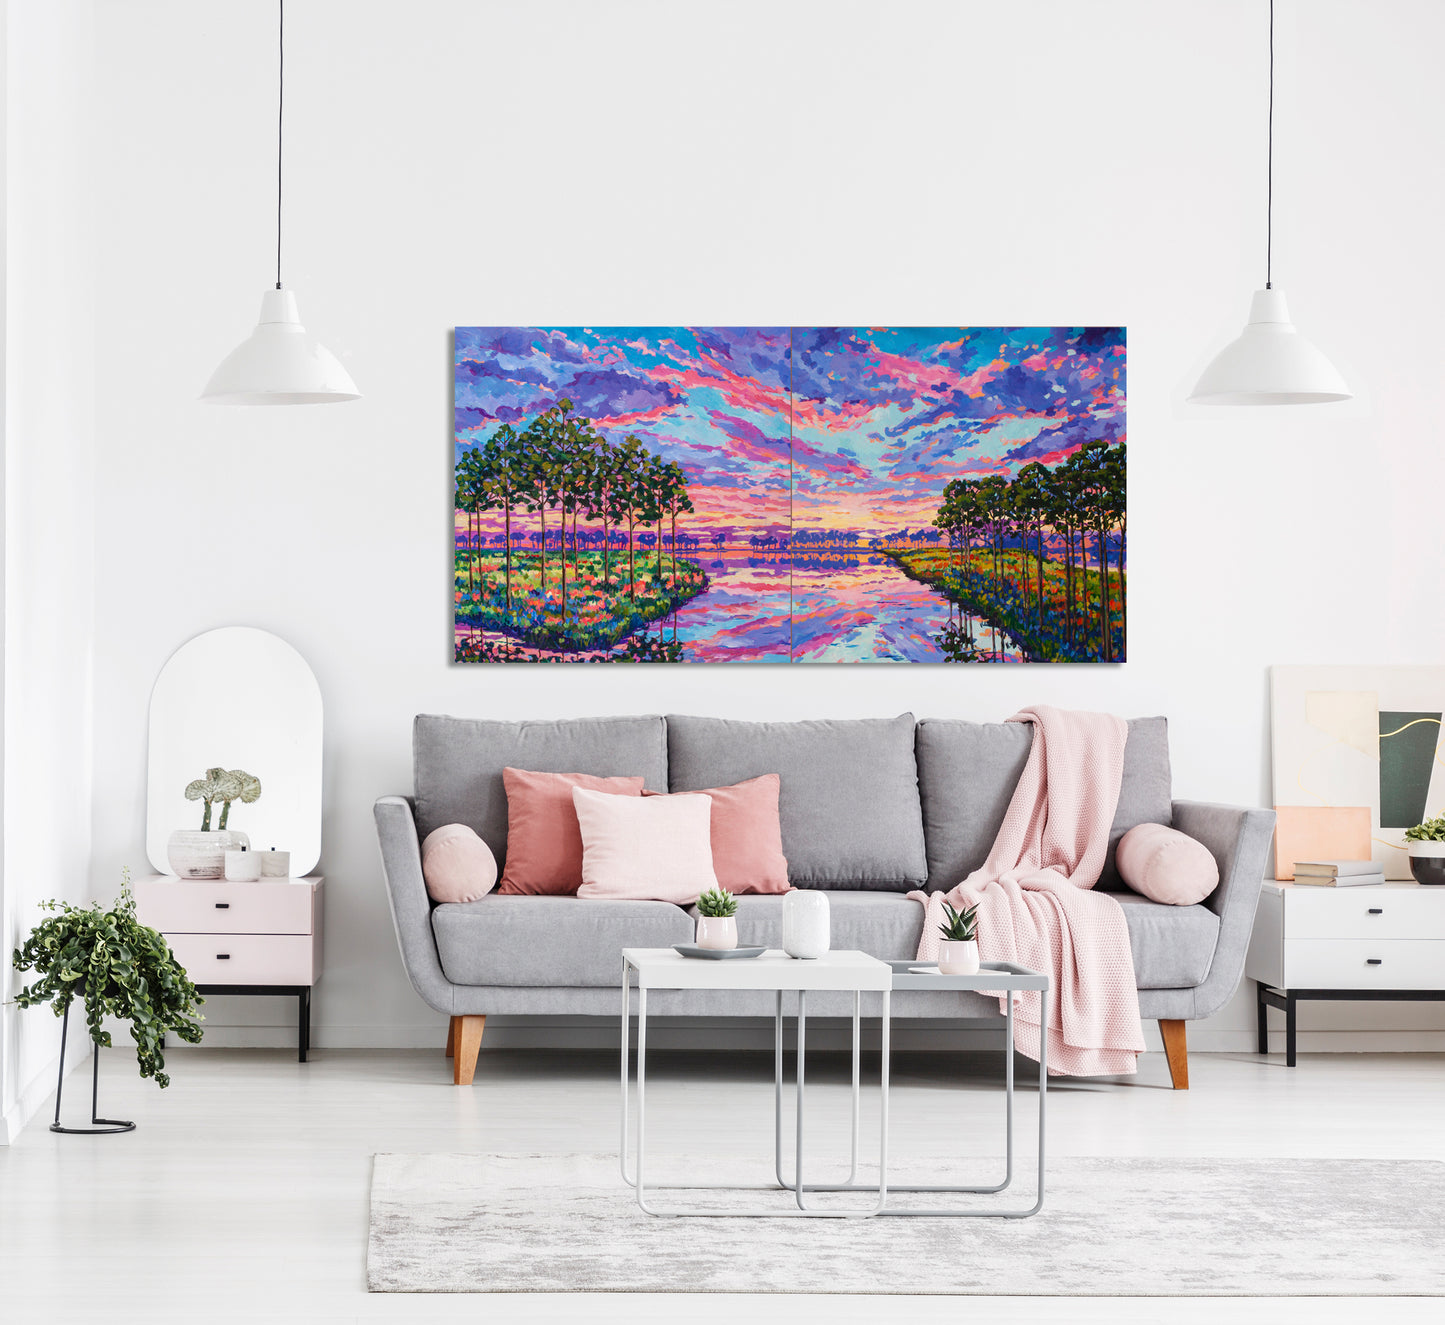 Diptych florida vibrant painting in in living room setting